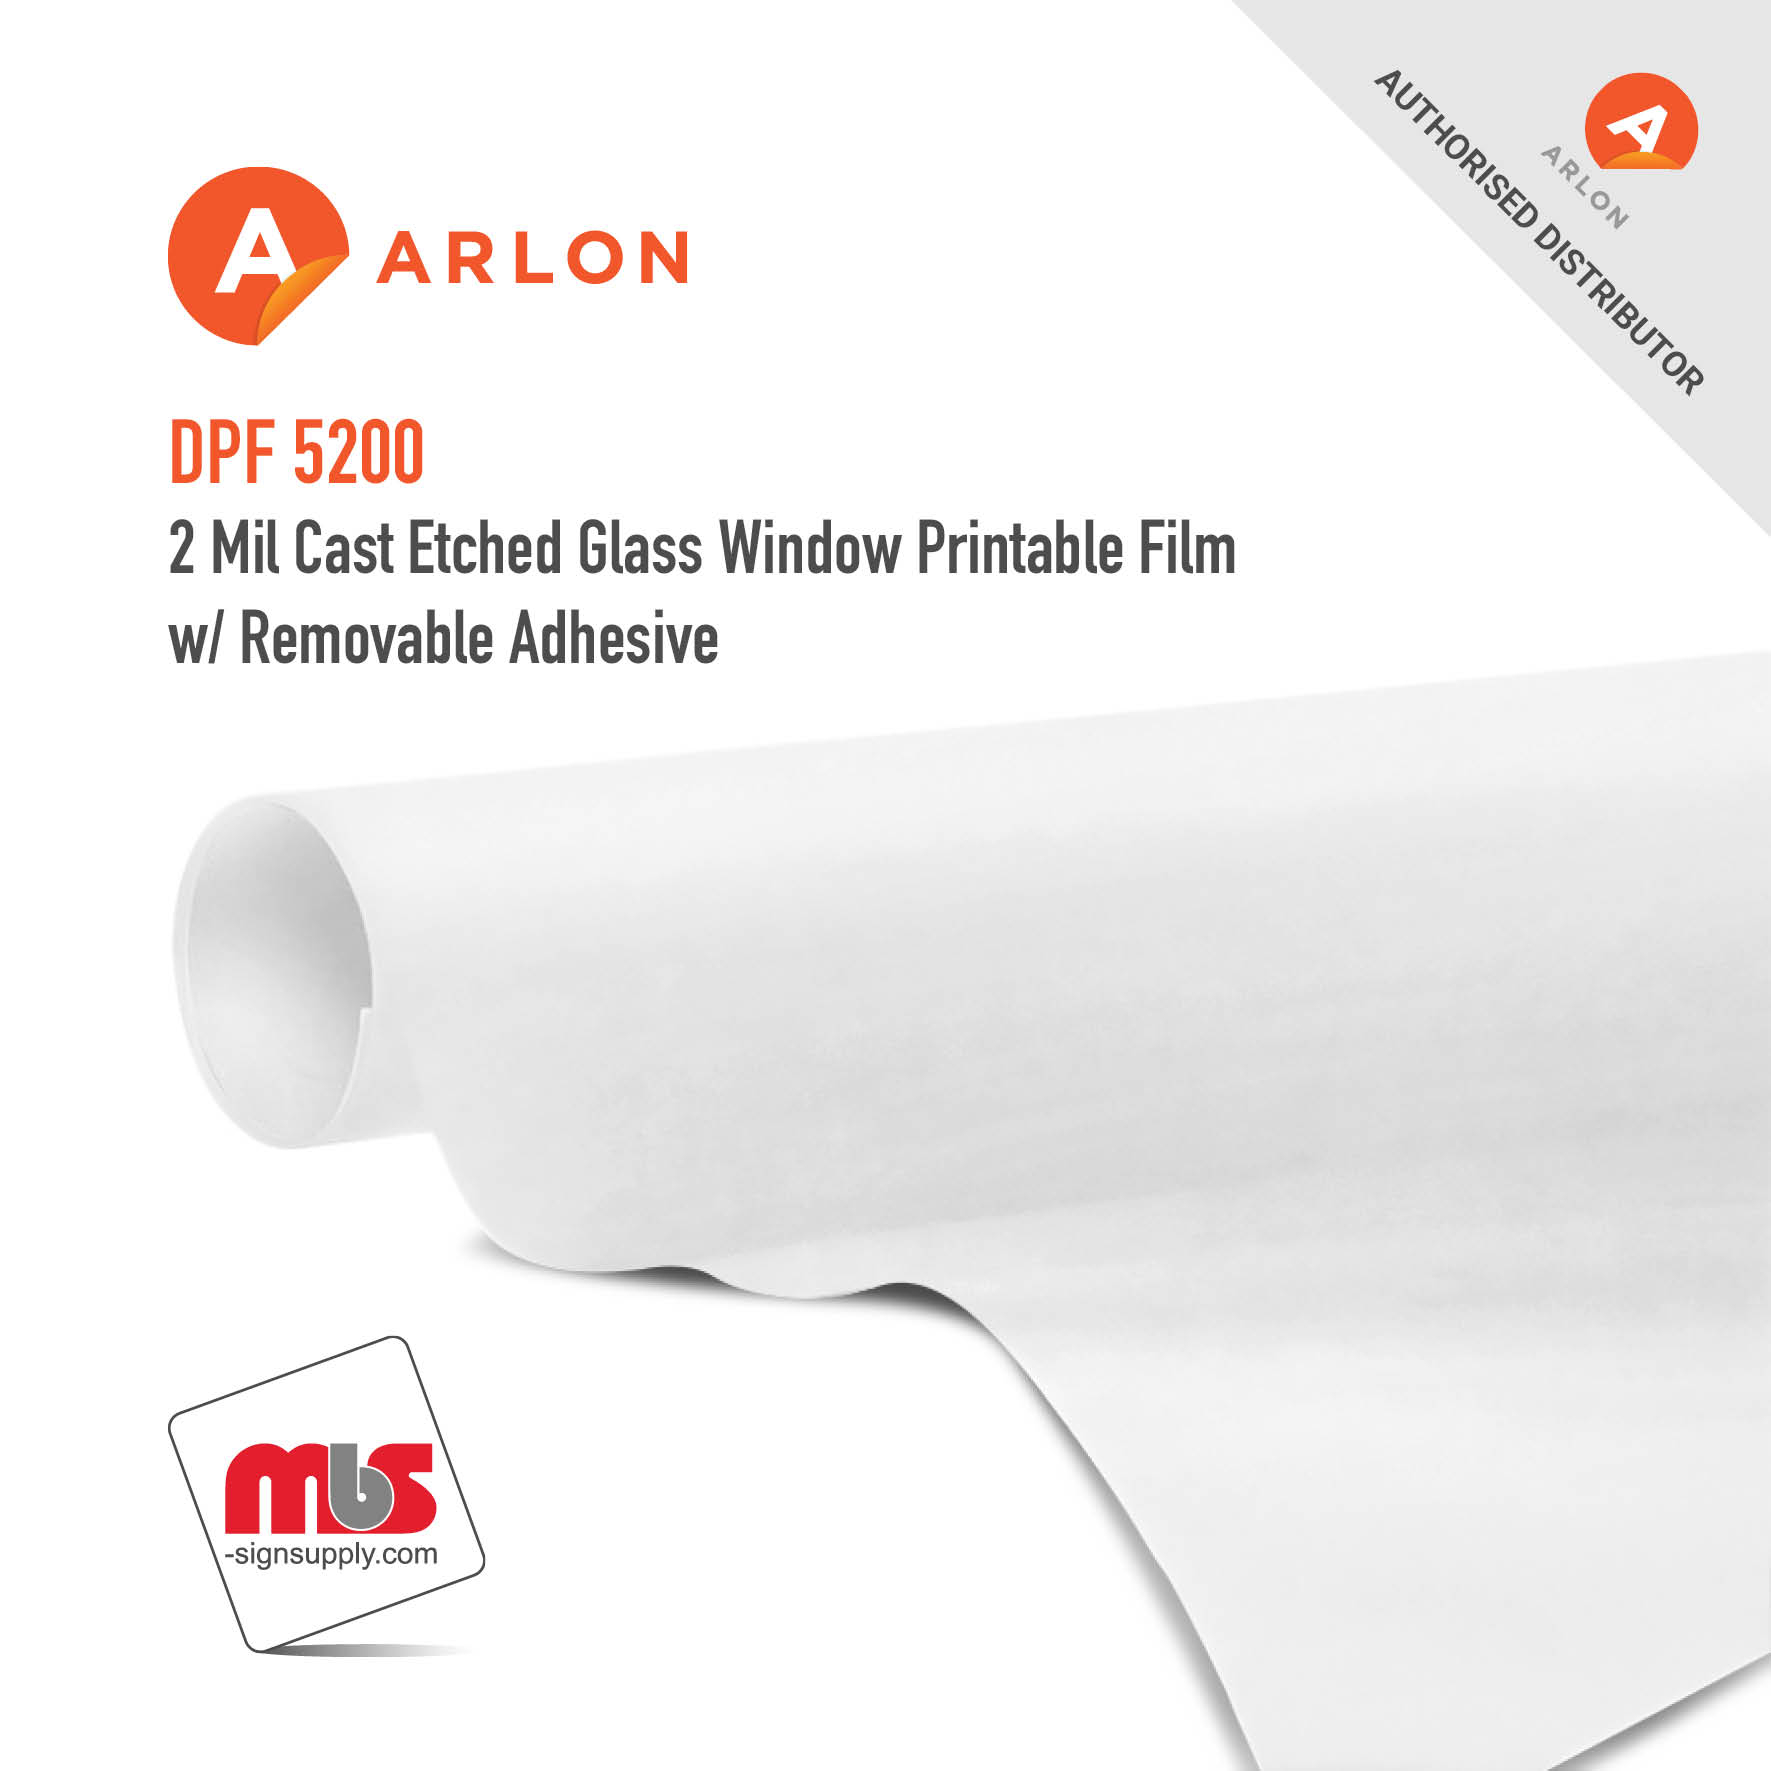 48'' x 50 Yard Roll - Arlon DPF 5200 2 Mil Cast Silver Etched Glass Window Printable Film w/ Removable Adhesive